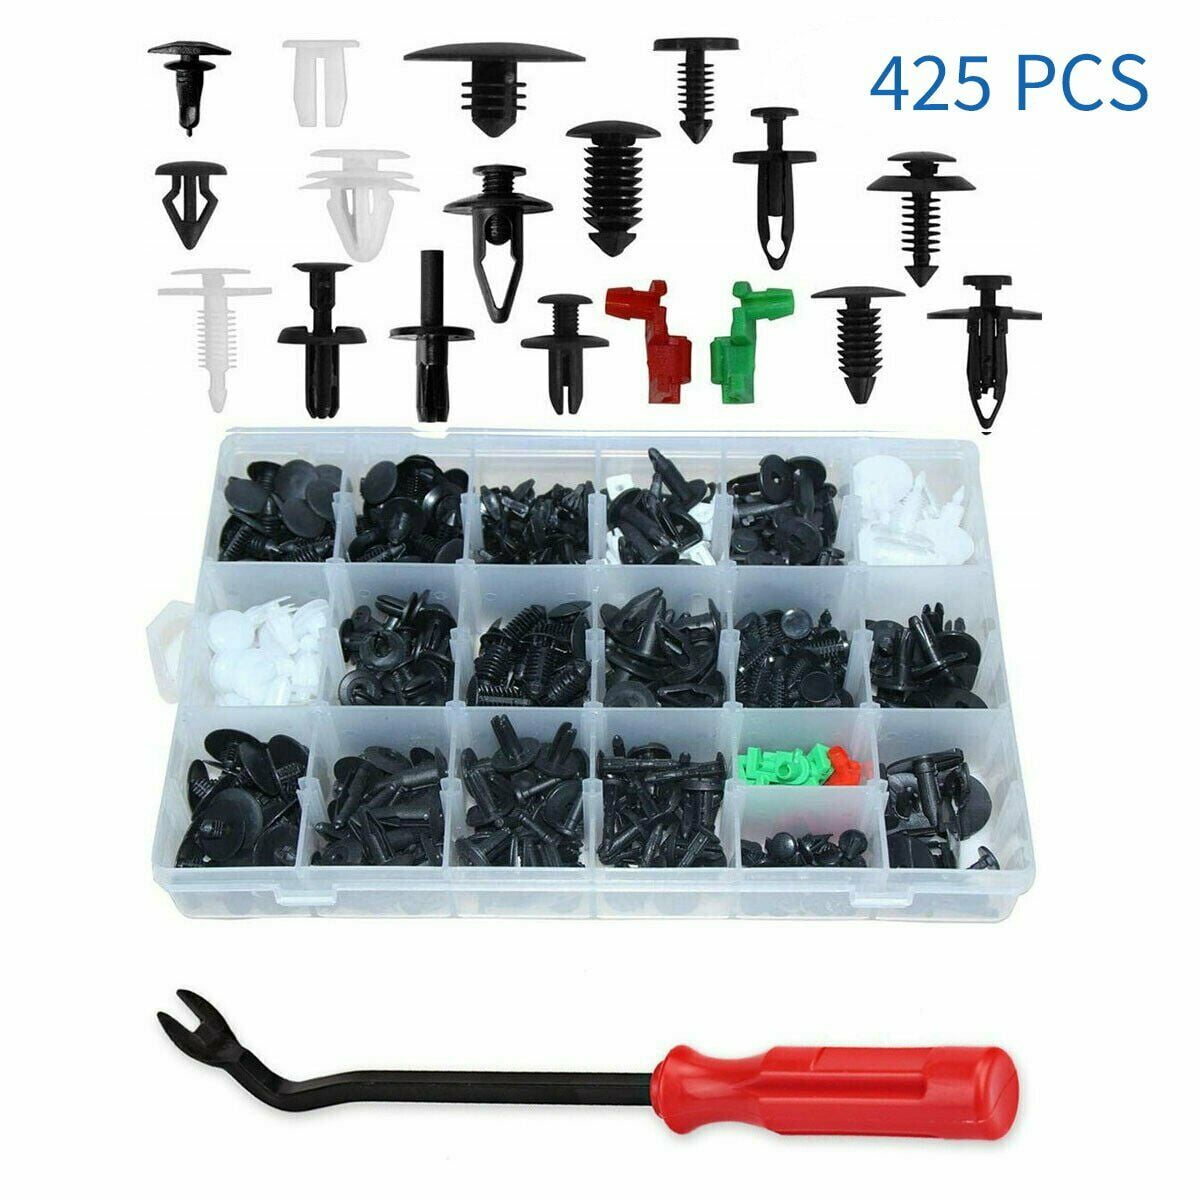 25pc+Fastener Remover Pack Nylon Bumper Cover Push Type Front & Rear Retainers Clips and Fastener Remover for Toyota 90467-07188 Camry Tundra & 4 Runner 2002 QMET 8mm 25 Pcs 